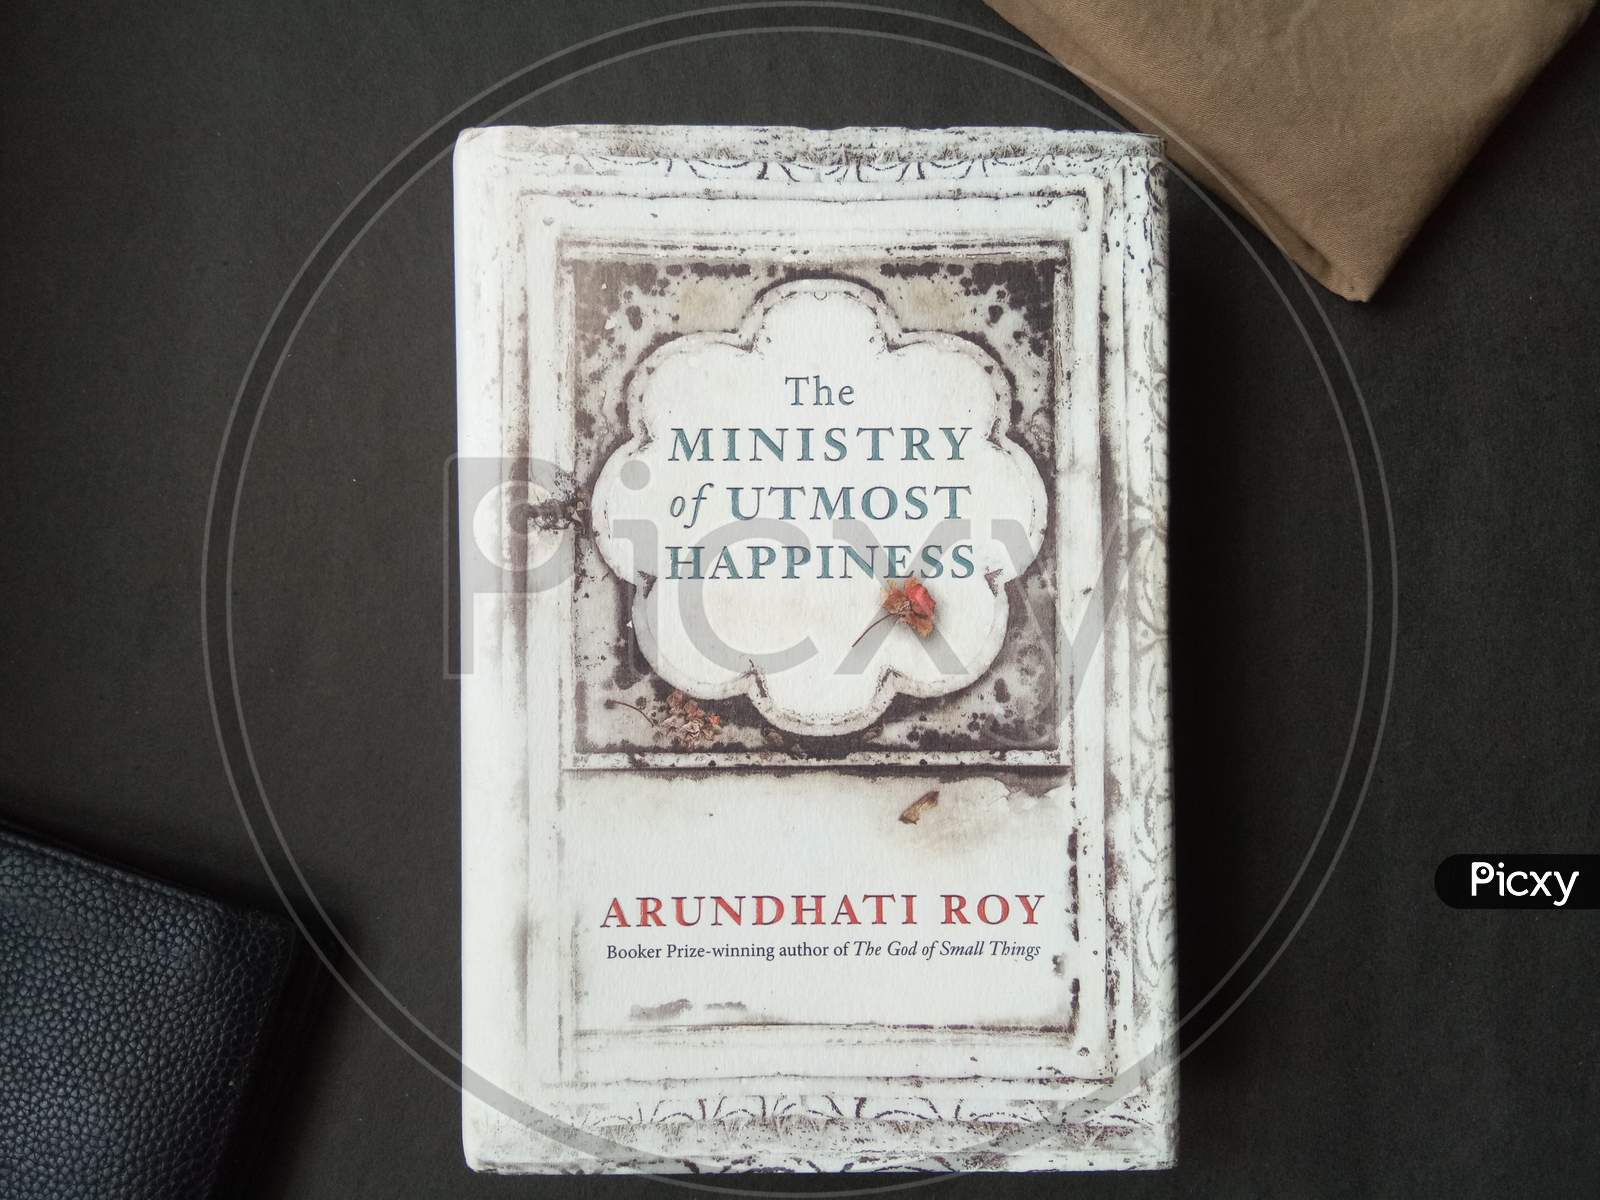 The ministry of utmost happiness by Arundhati roy.